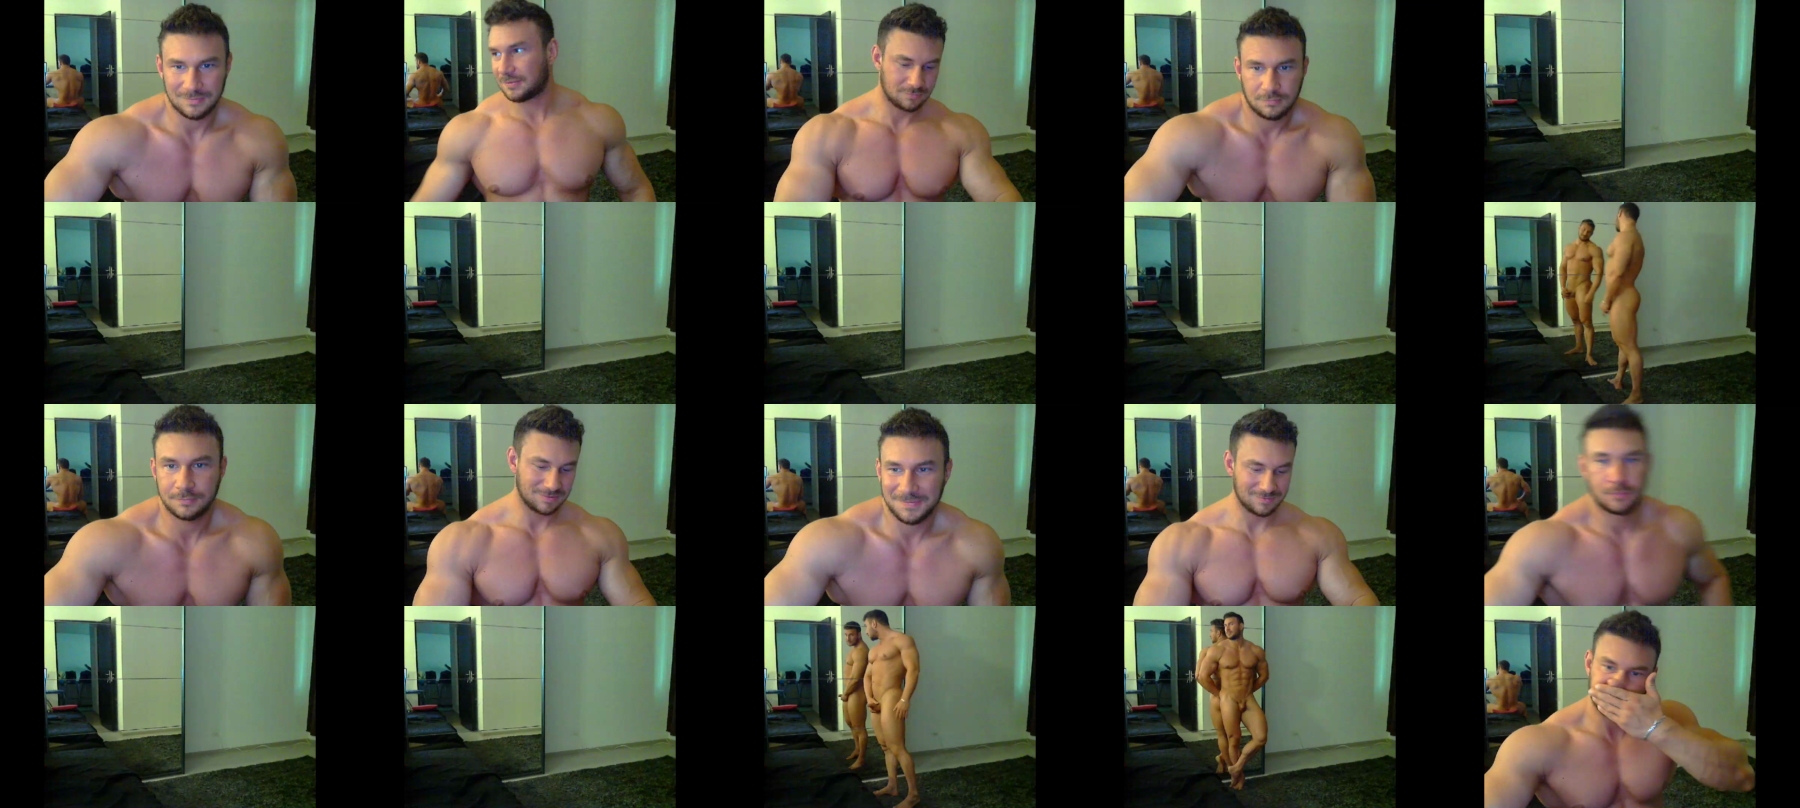 Muscularkevin21  22-08-2021 Male Topless